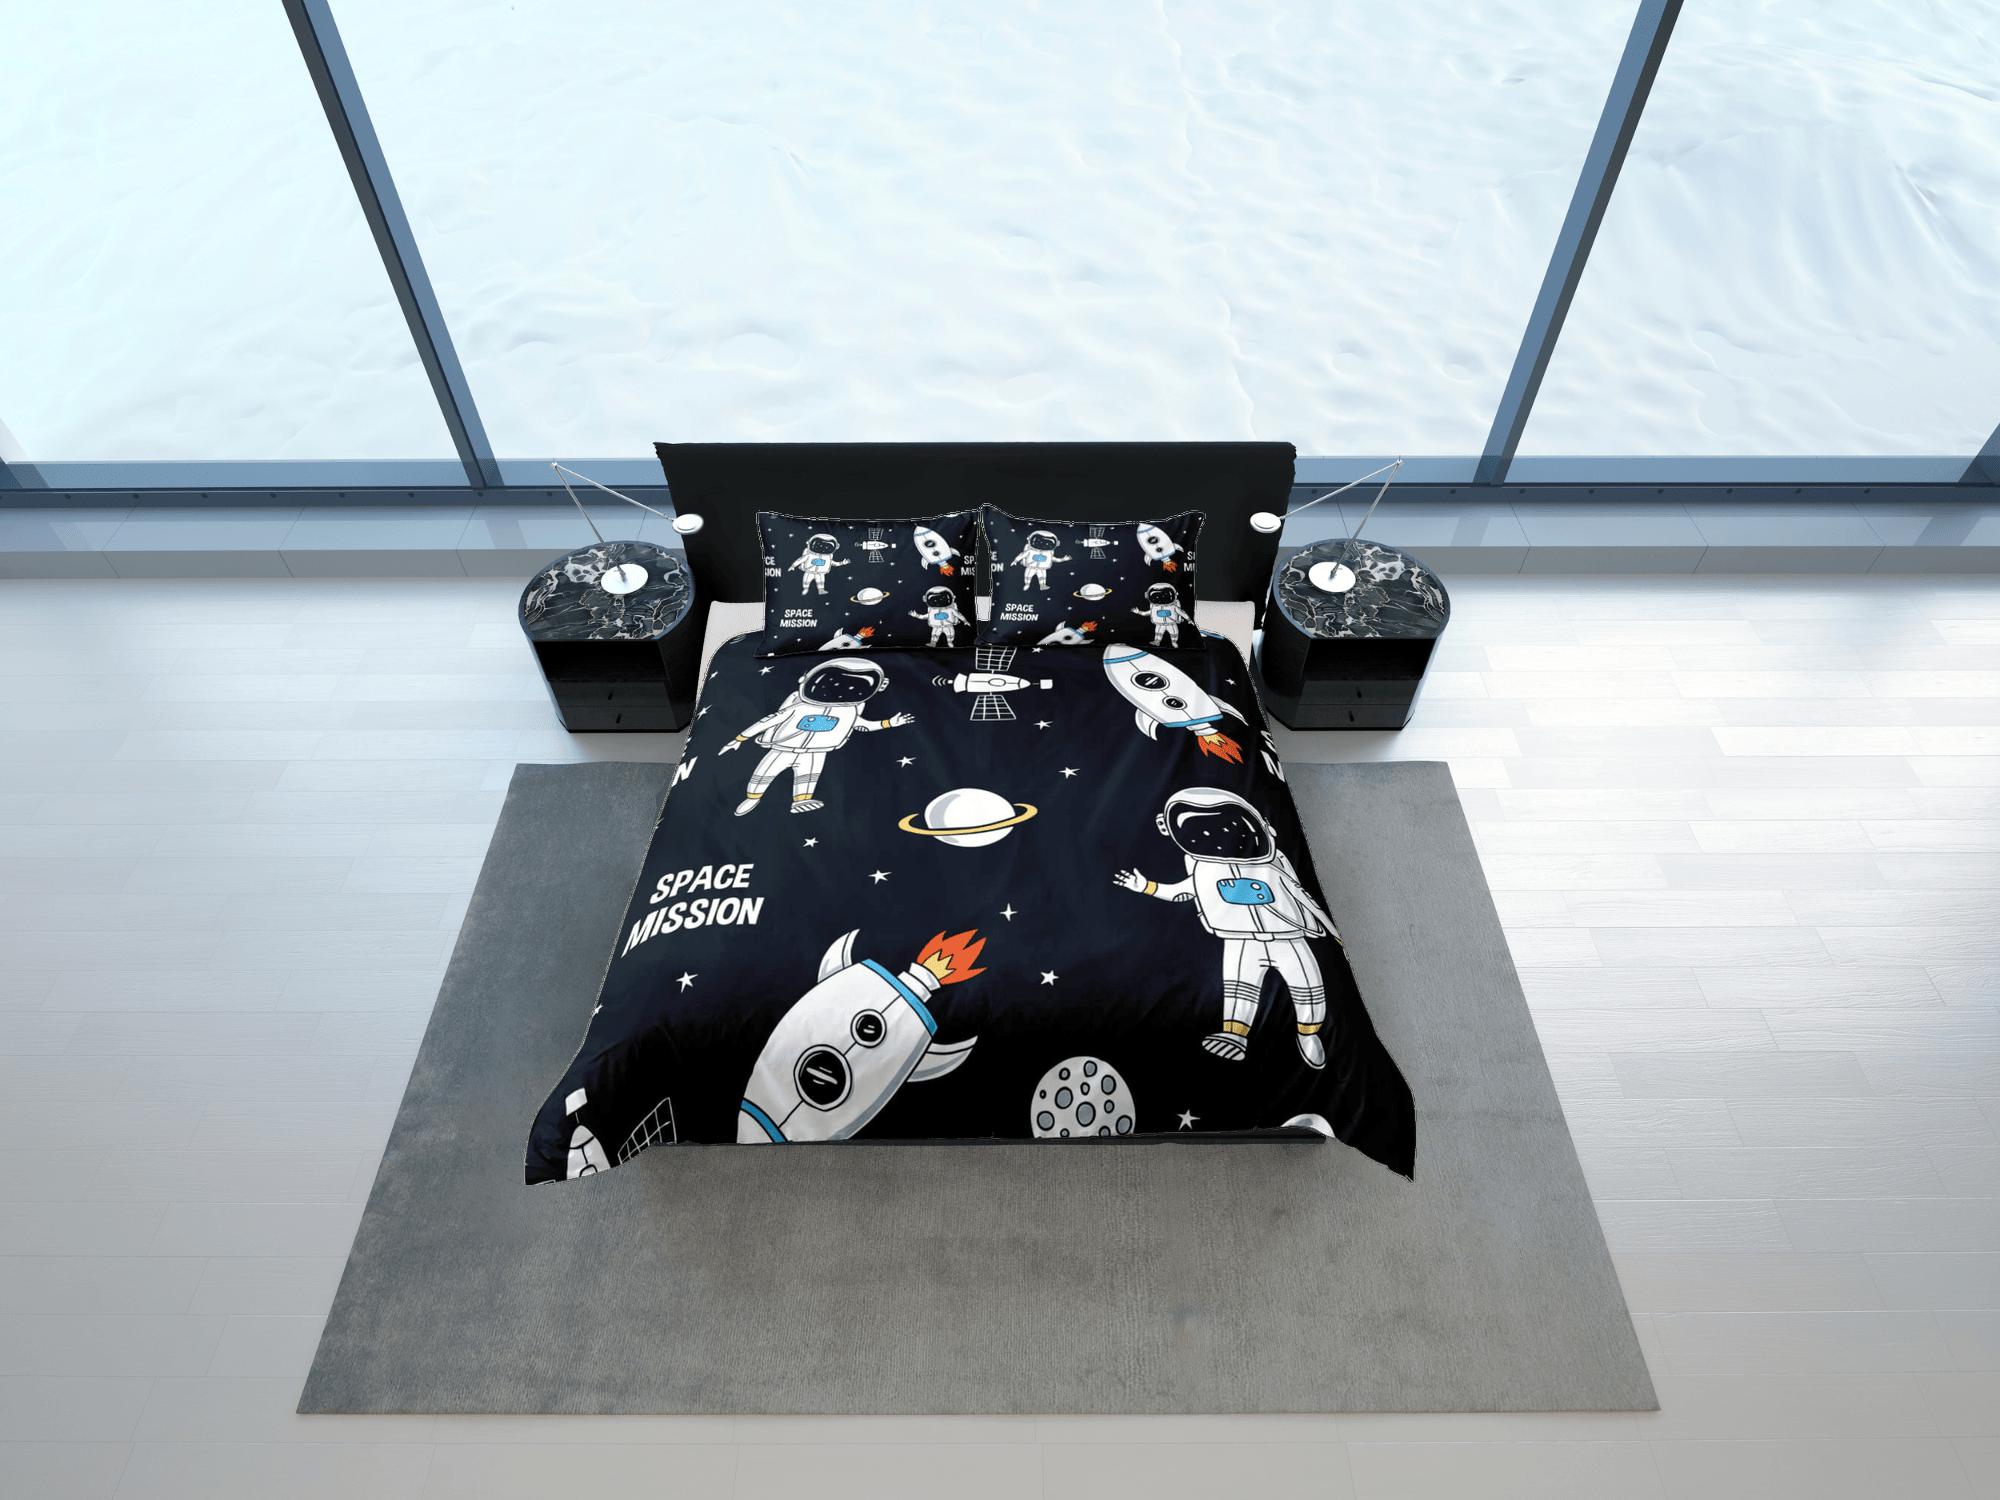 daintyduvet Space mission astronaut duvet cover set for kids, galaxy bedding set full, king, queen, dorm bedding, toddler bedding aesthetic bedspread